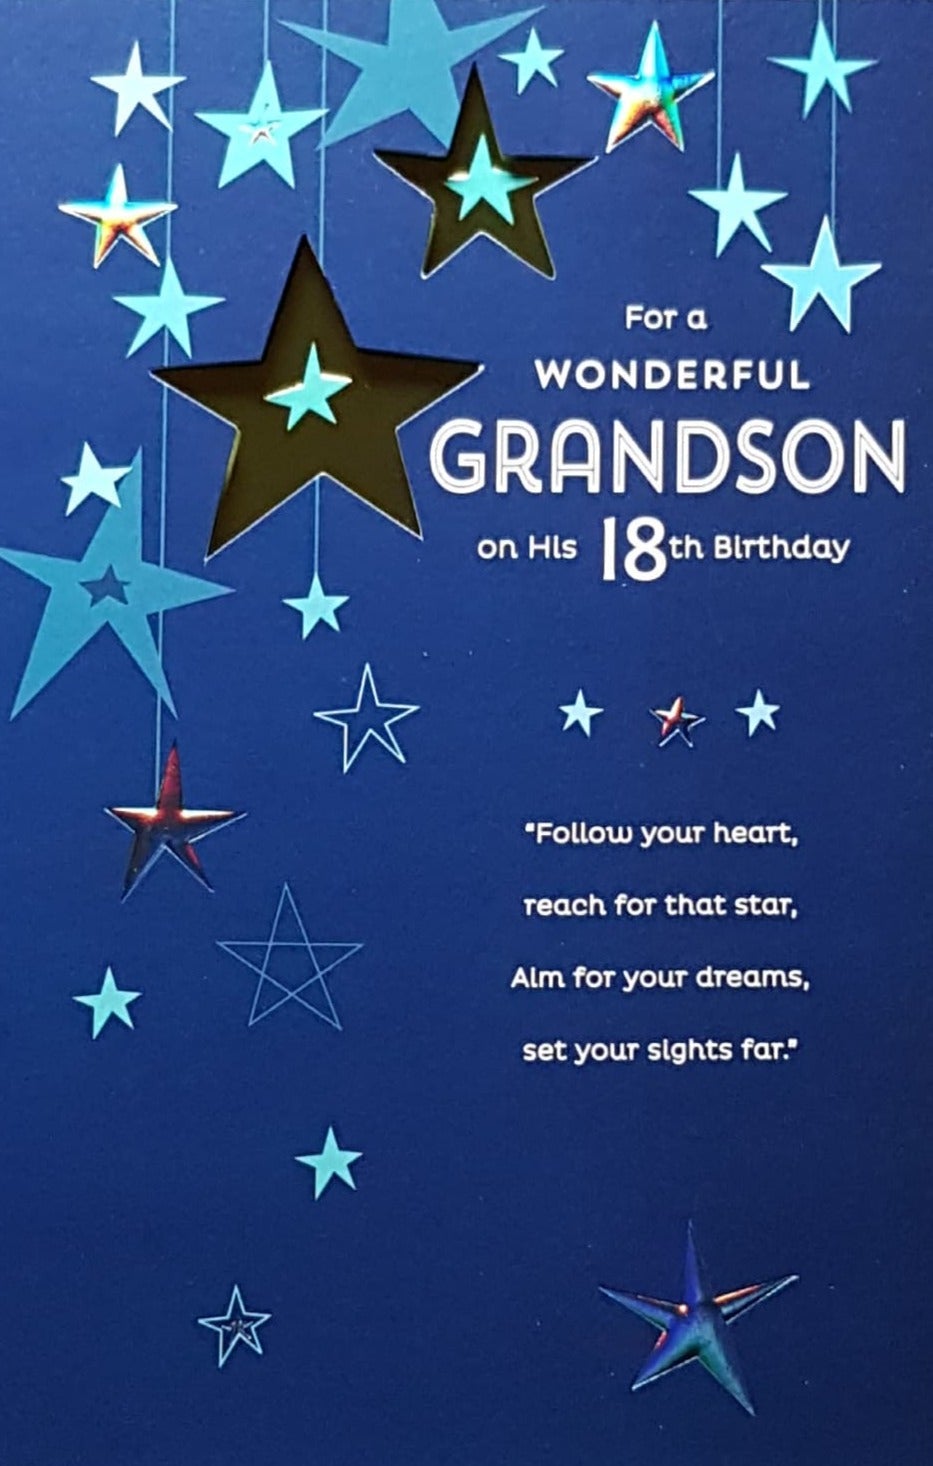 Age 18 Birthday Card - Grandson / Shiny Blue Stars Hanging From Strings